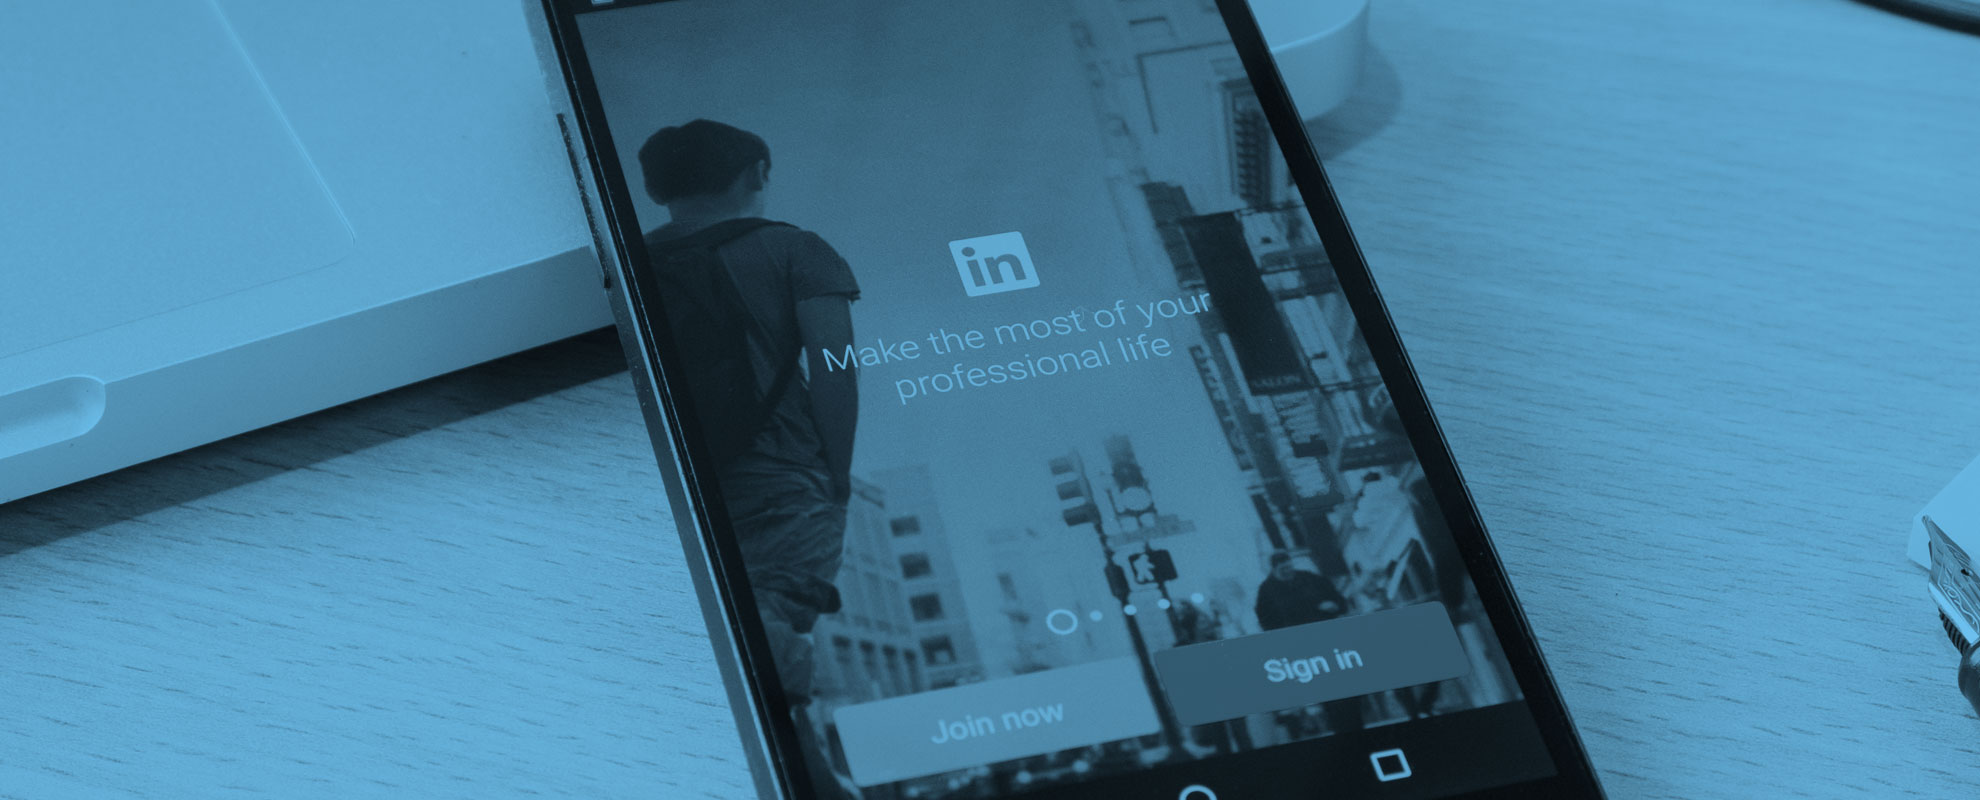 LinkedIn Guide – A Few Things You Must Know the get the Most out of your Account